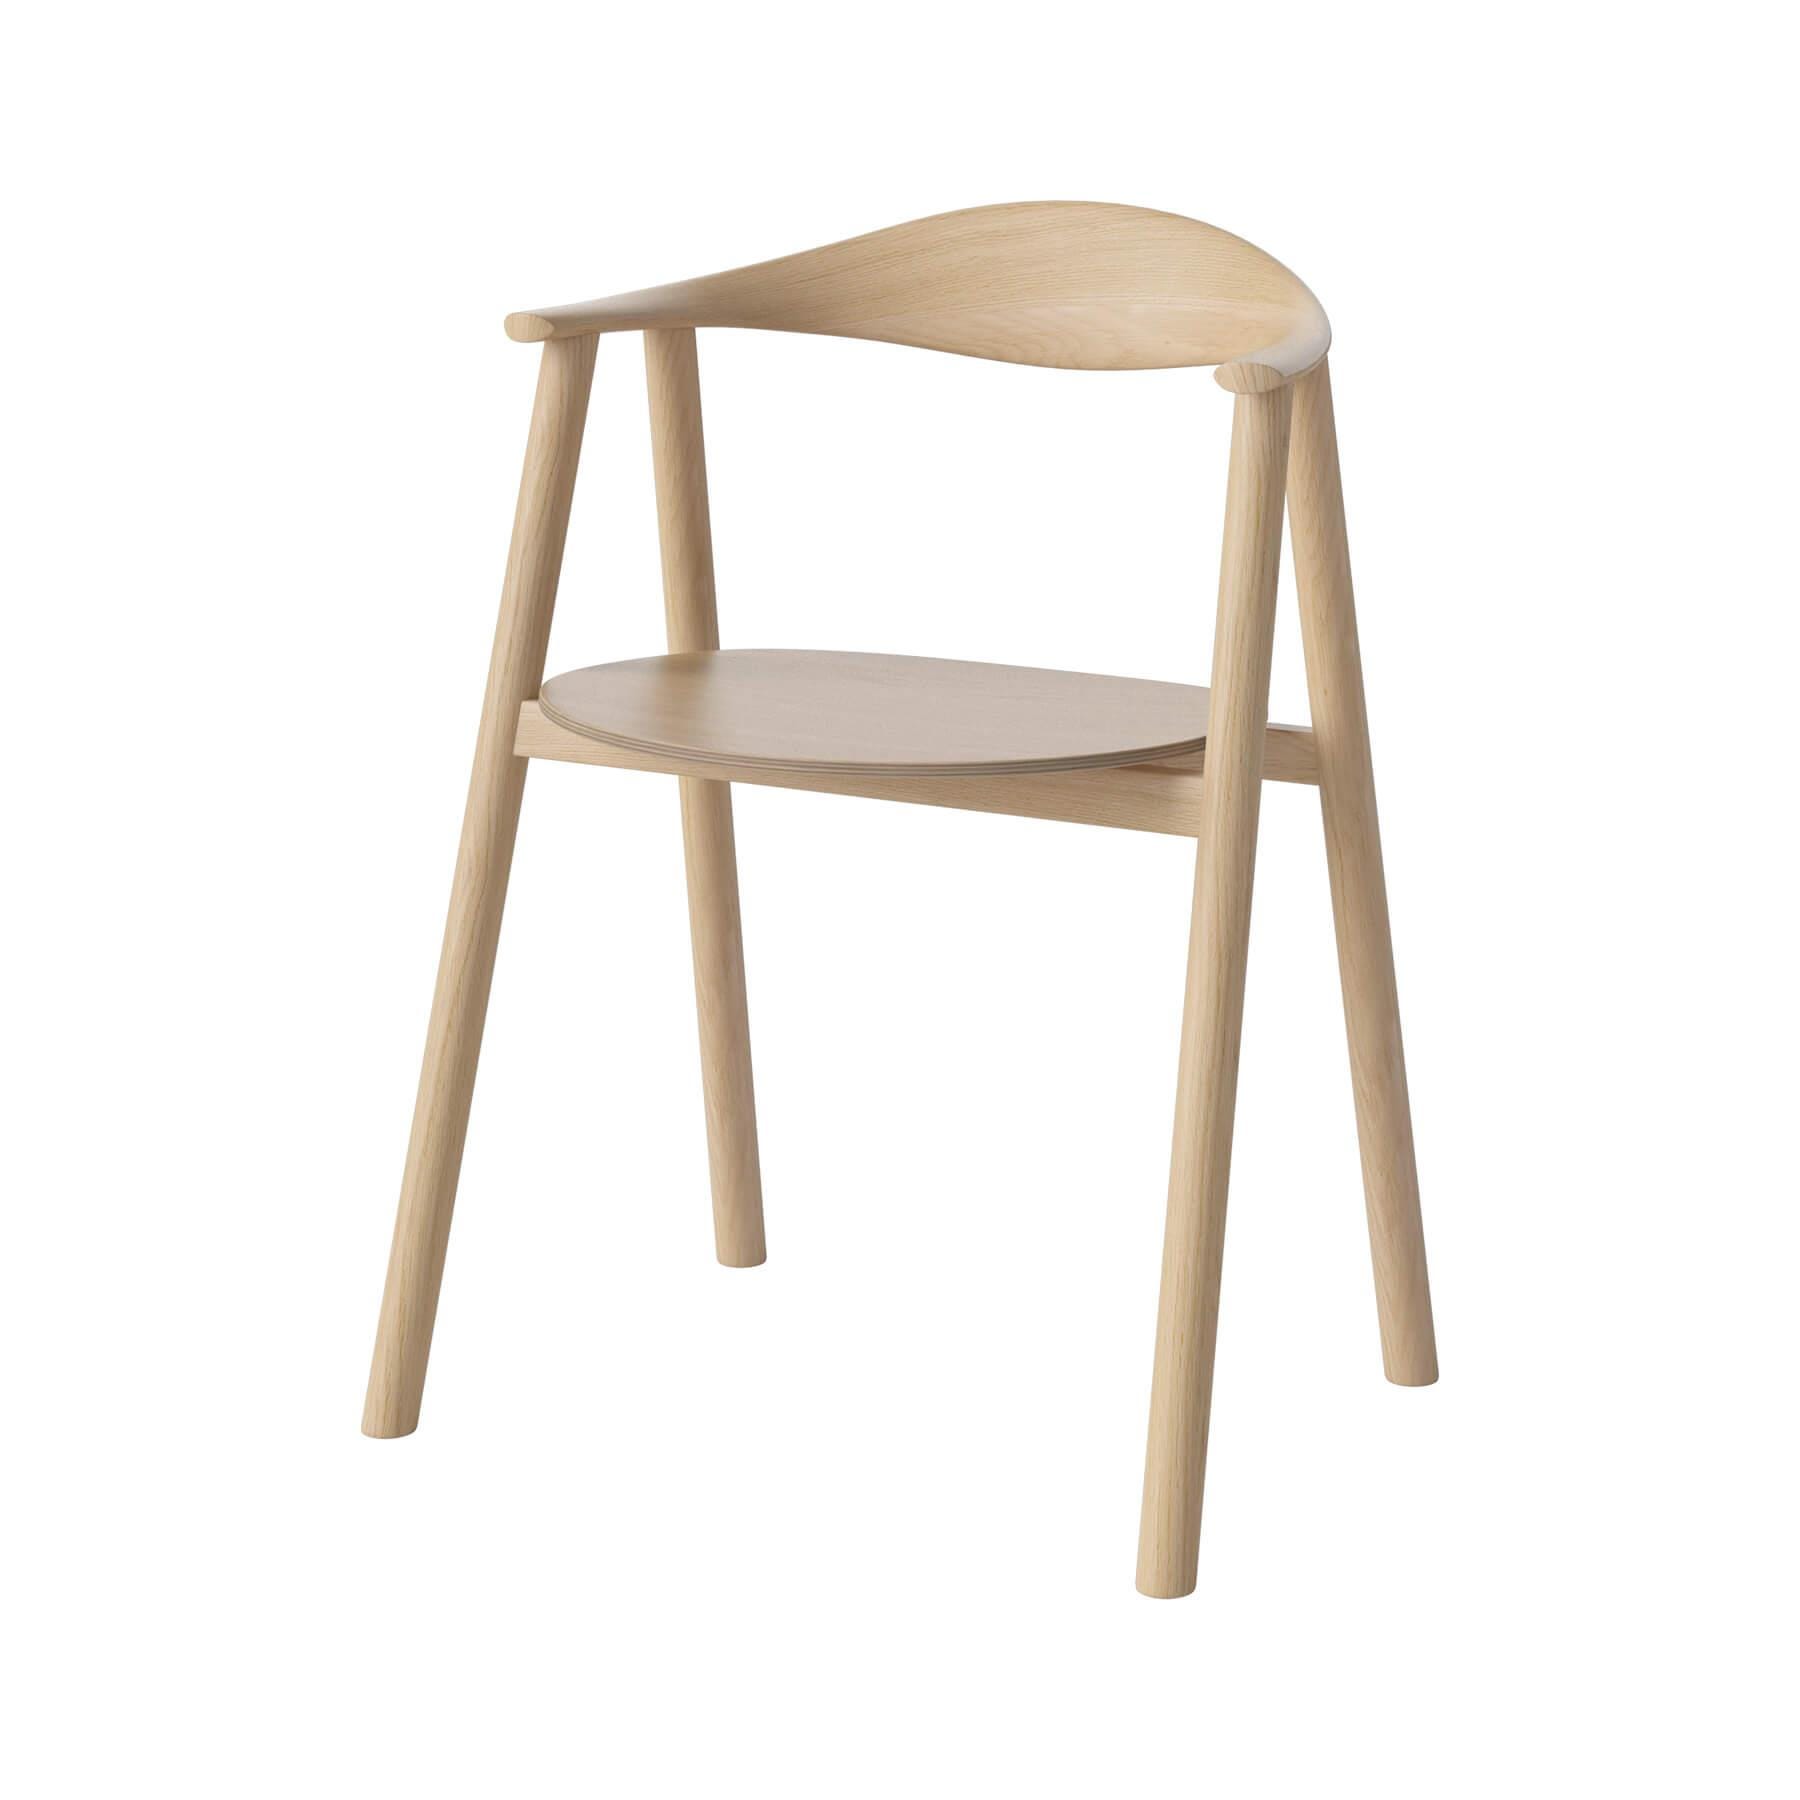 Bolia Swing Armchair Unupholstered White Pigmented Oak Designer Furniture From Holloways Of Ludlow